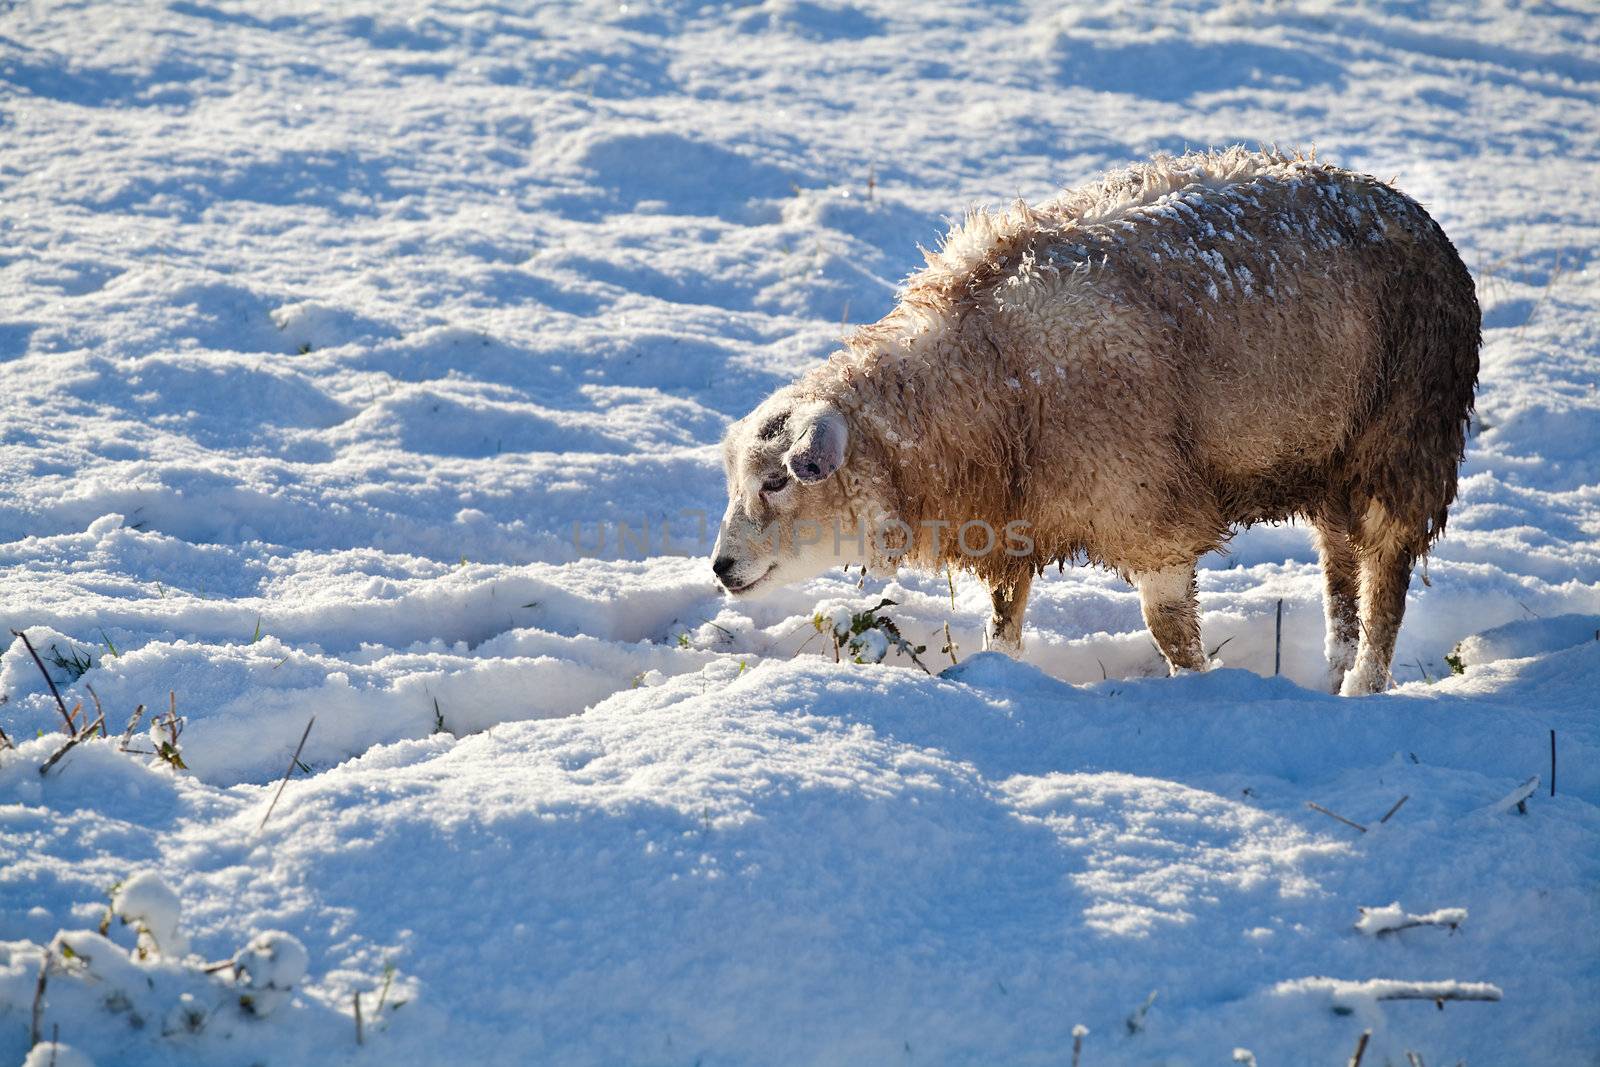 Dutch cute sheep outdoors on winter snowy pasture